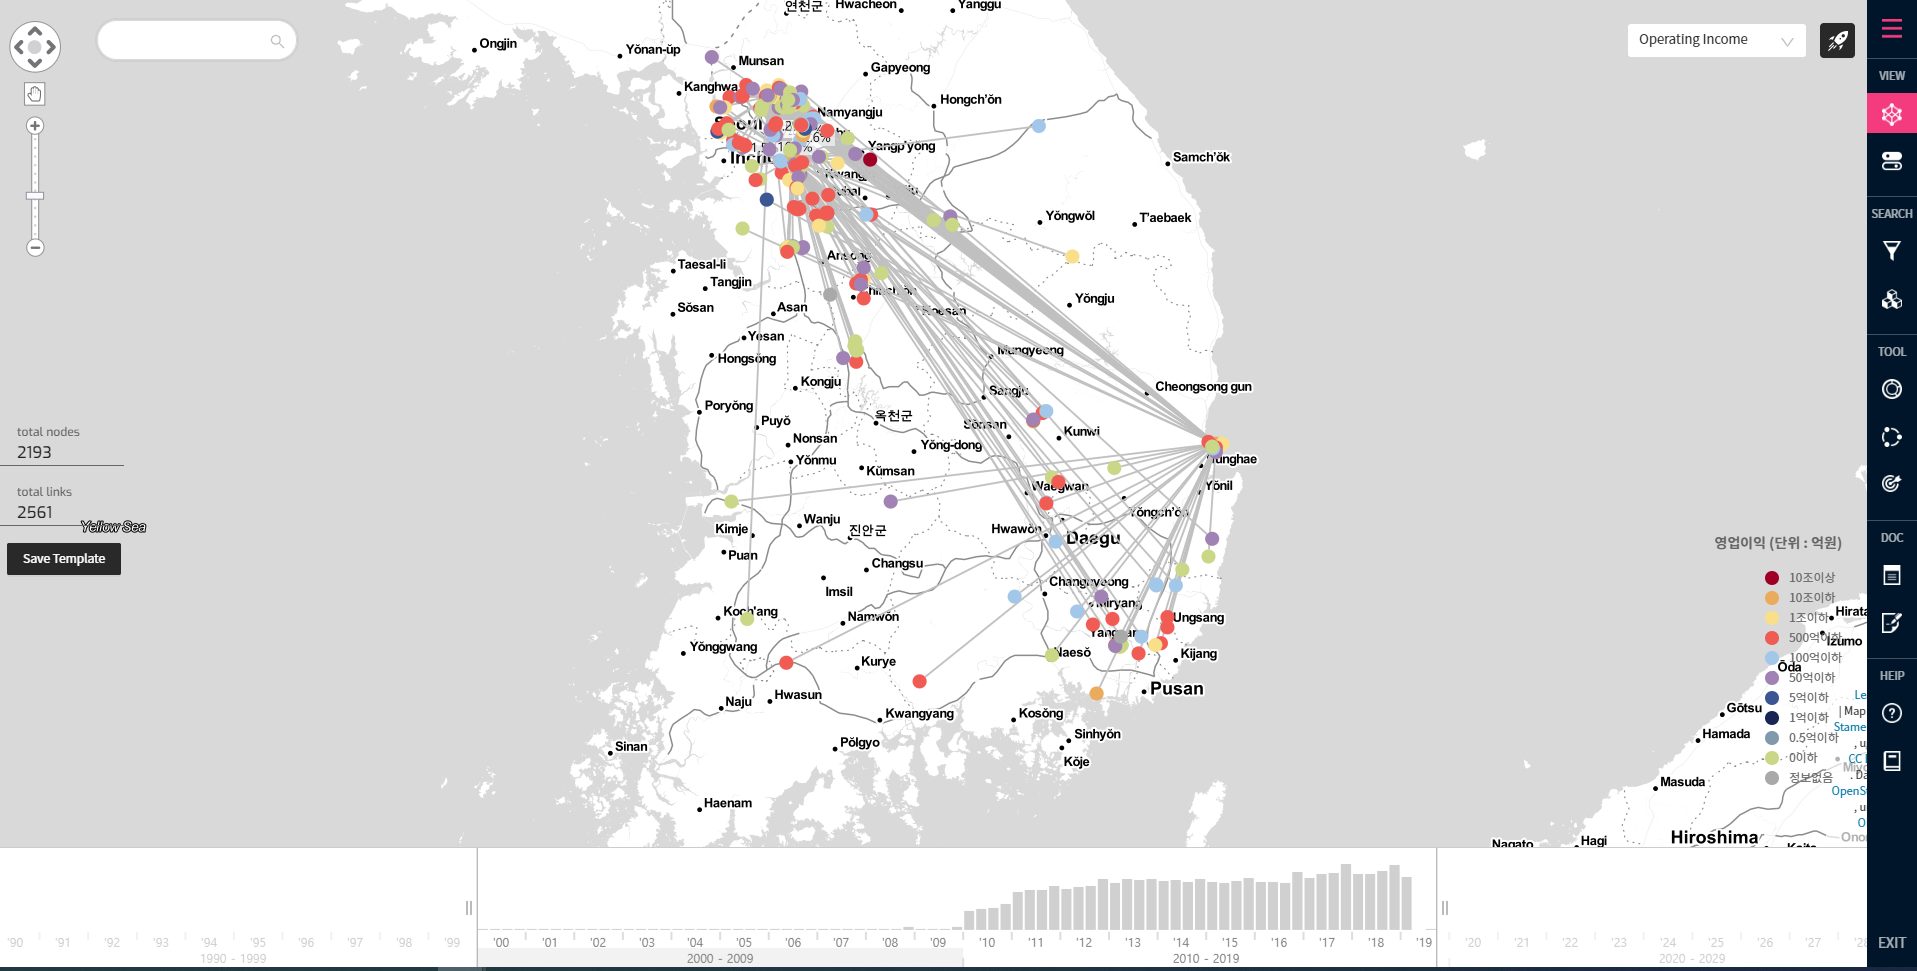 connected supply chains: EffectMall makes good use of KeyLines’ map mode, showing geographic connections between companies